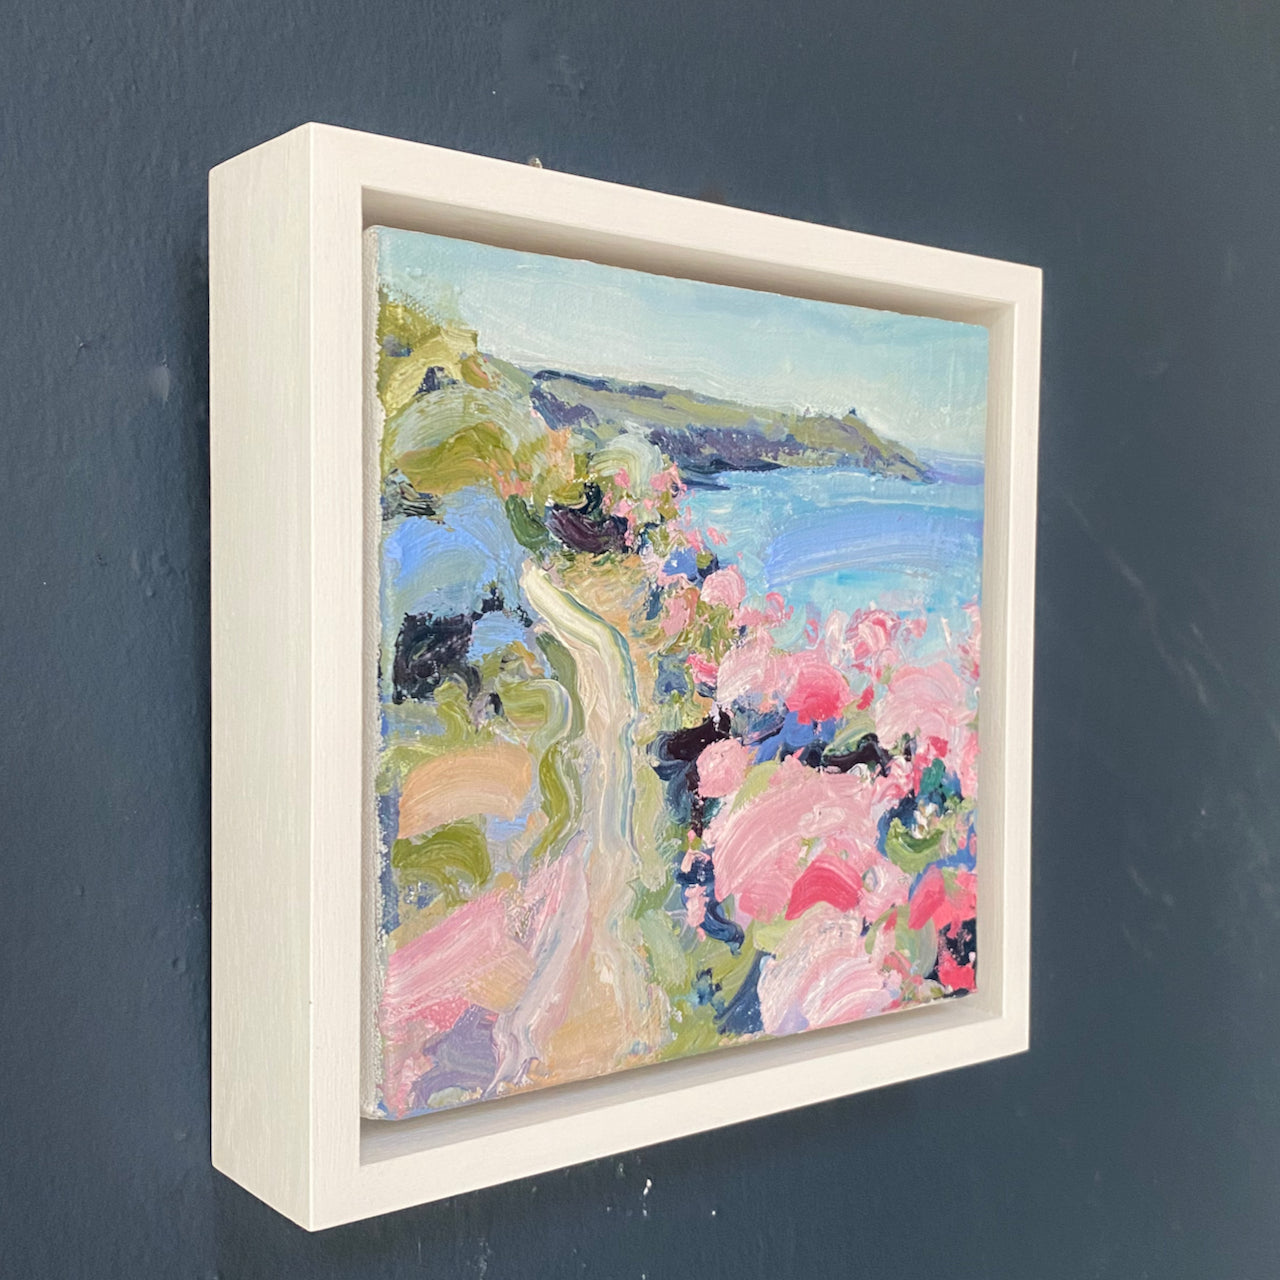 In a deep white frame this is a Jill Hudson oli painting of Rame Head in south east cornwall, the headland is dark green with a pale blue and purple sea and the coast path  features pink, white and blue flowers